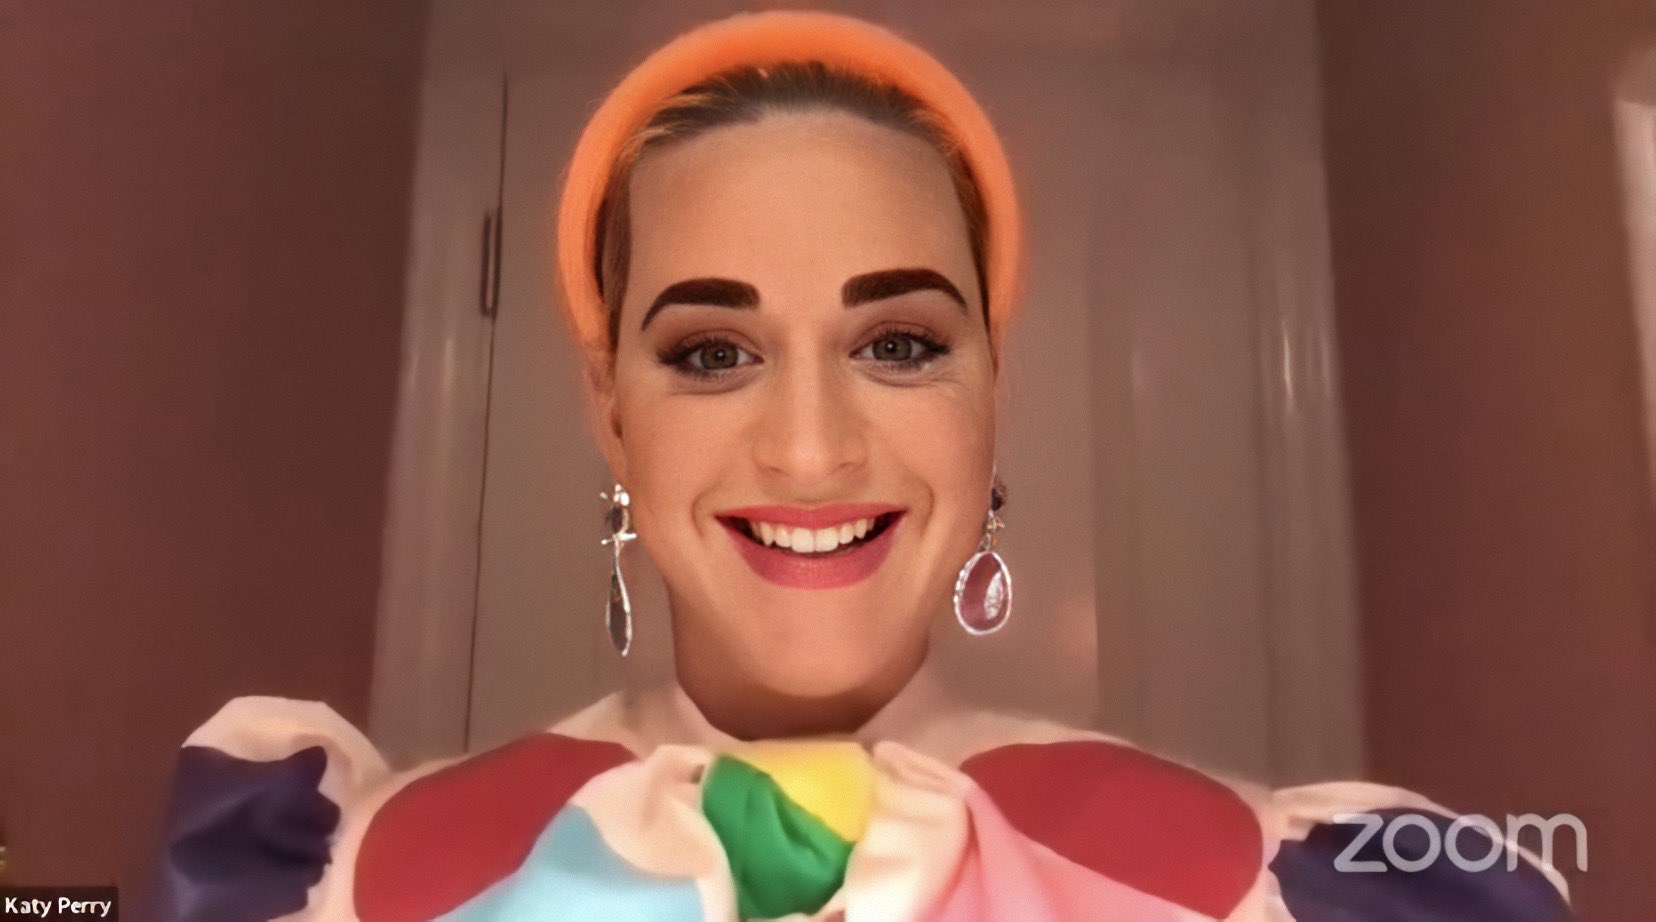 Katy Perry Dildo Porn - Katy Perry Gives Fans a Sneak Peek at Her Baby Girl's Nursery, Wardrobe